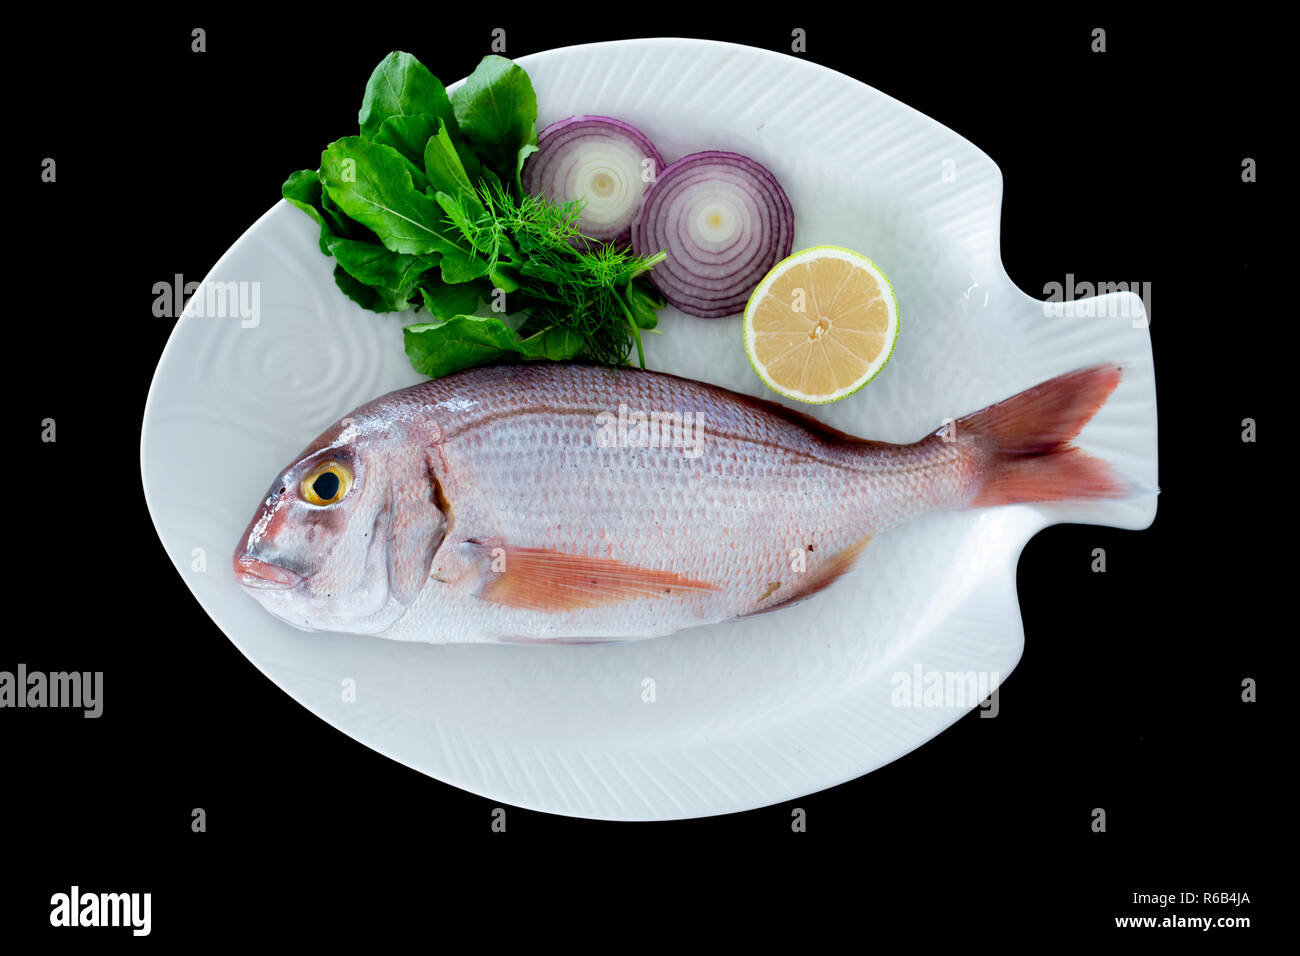 Red porgy as known as sea bream with rockets leaves served on white plate with black background Stock Photo